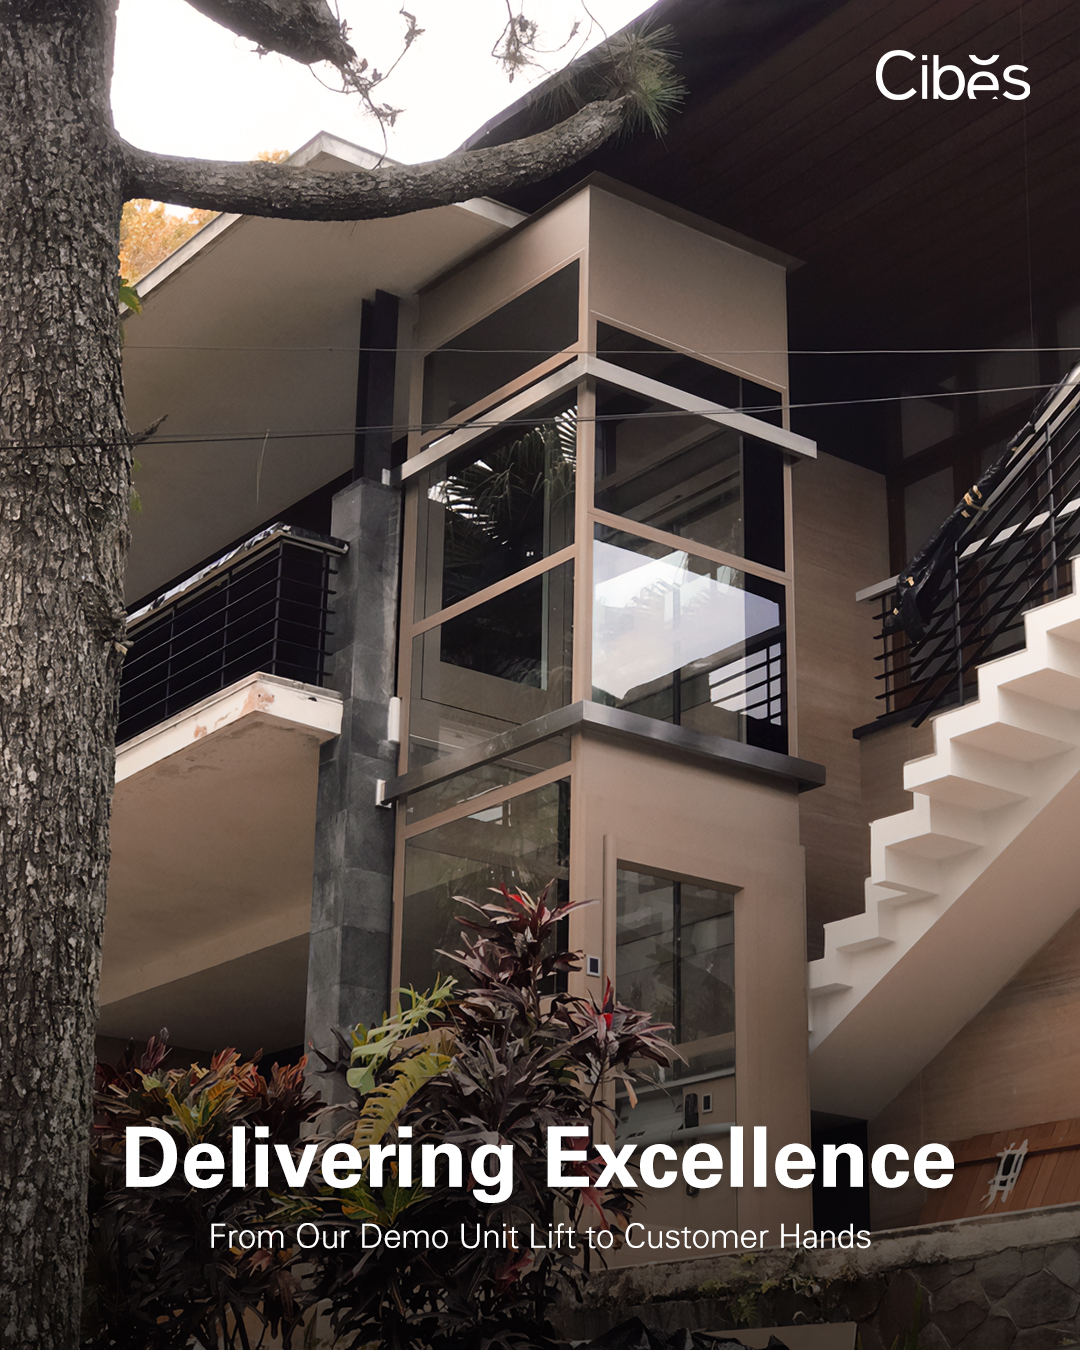 Delivering Excellence: From Our Demo Unit Lift to Customer Hands